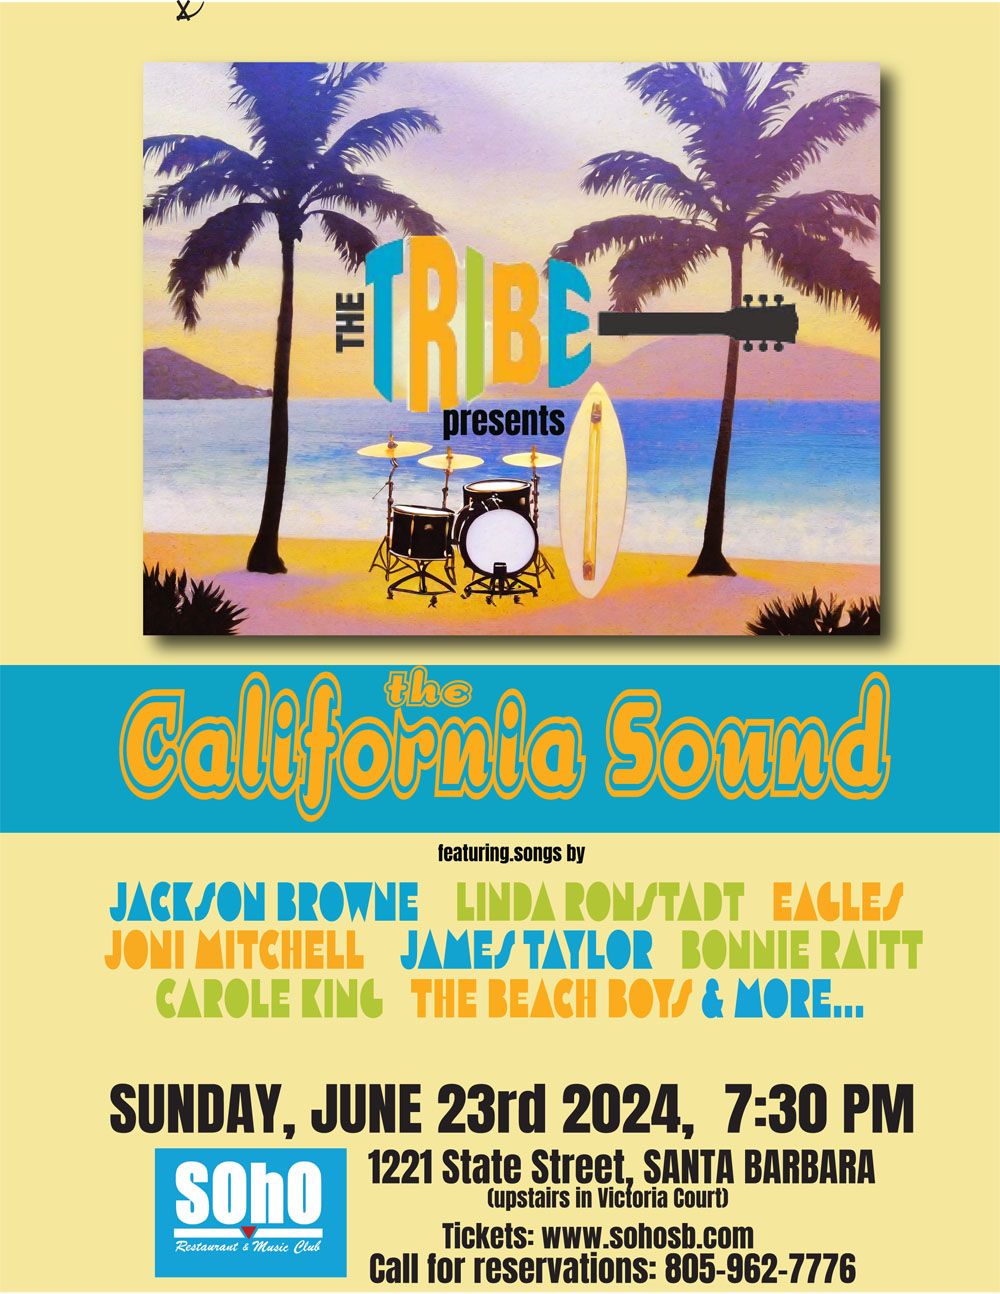 The Tribe presents: The California Sound